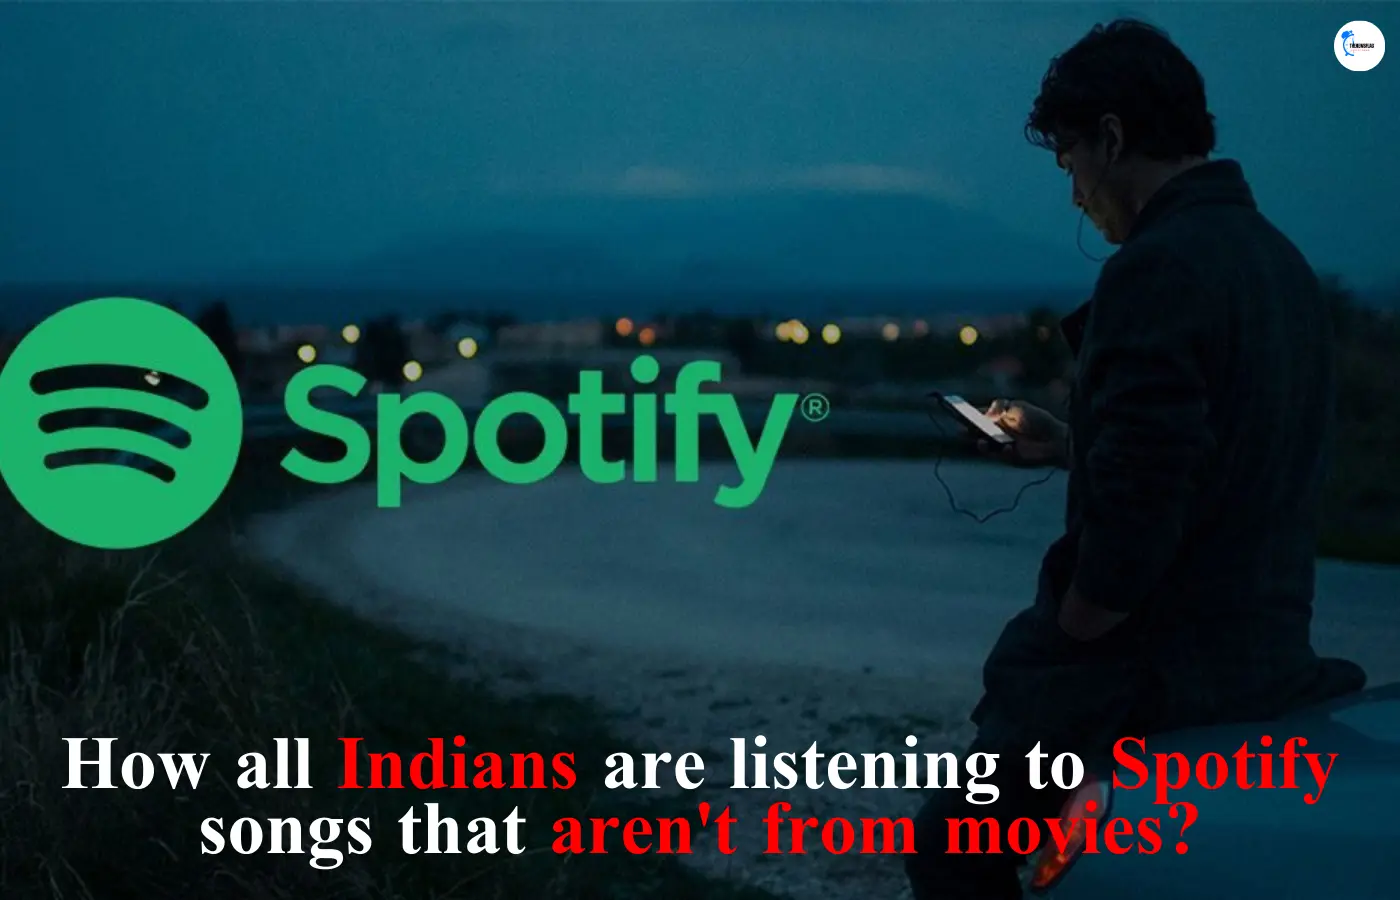 How all Indians are listening to Spotify songs that aren't from movies